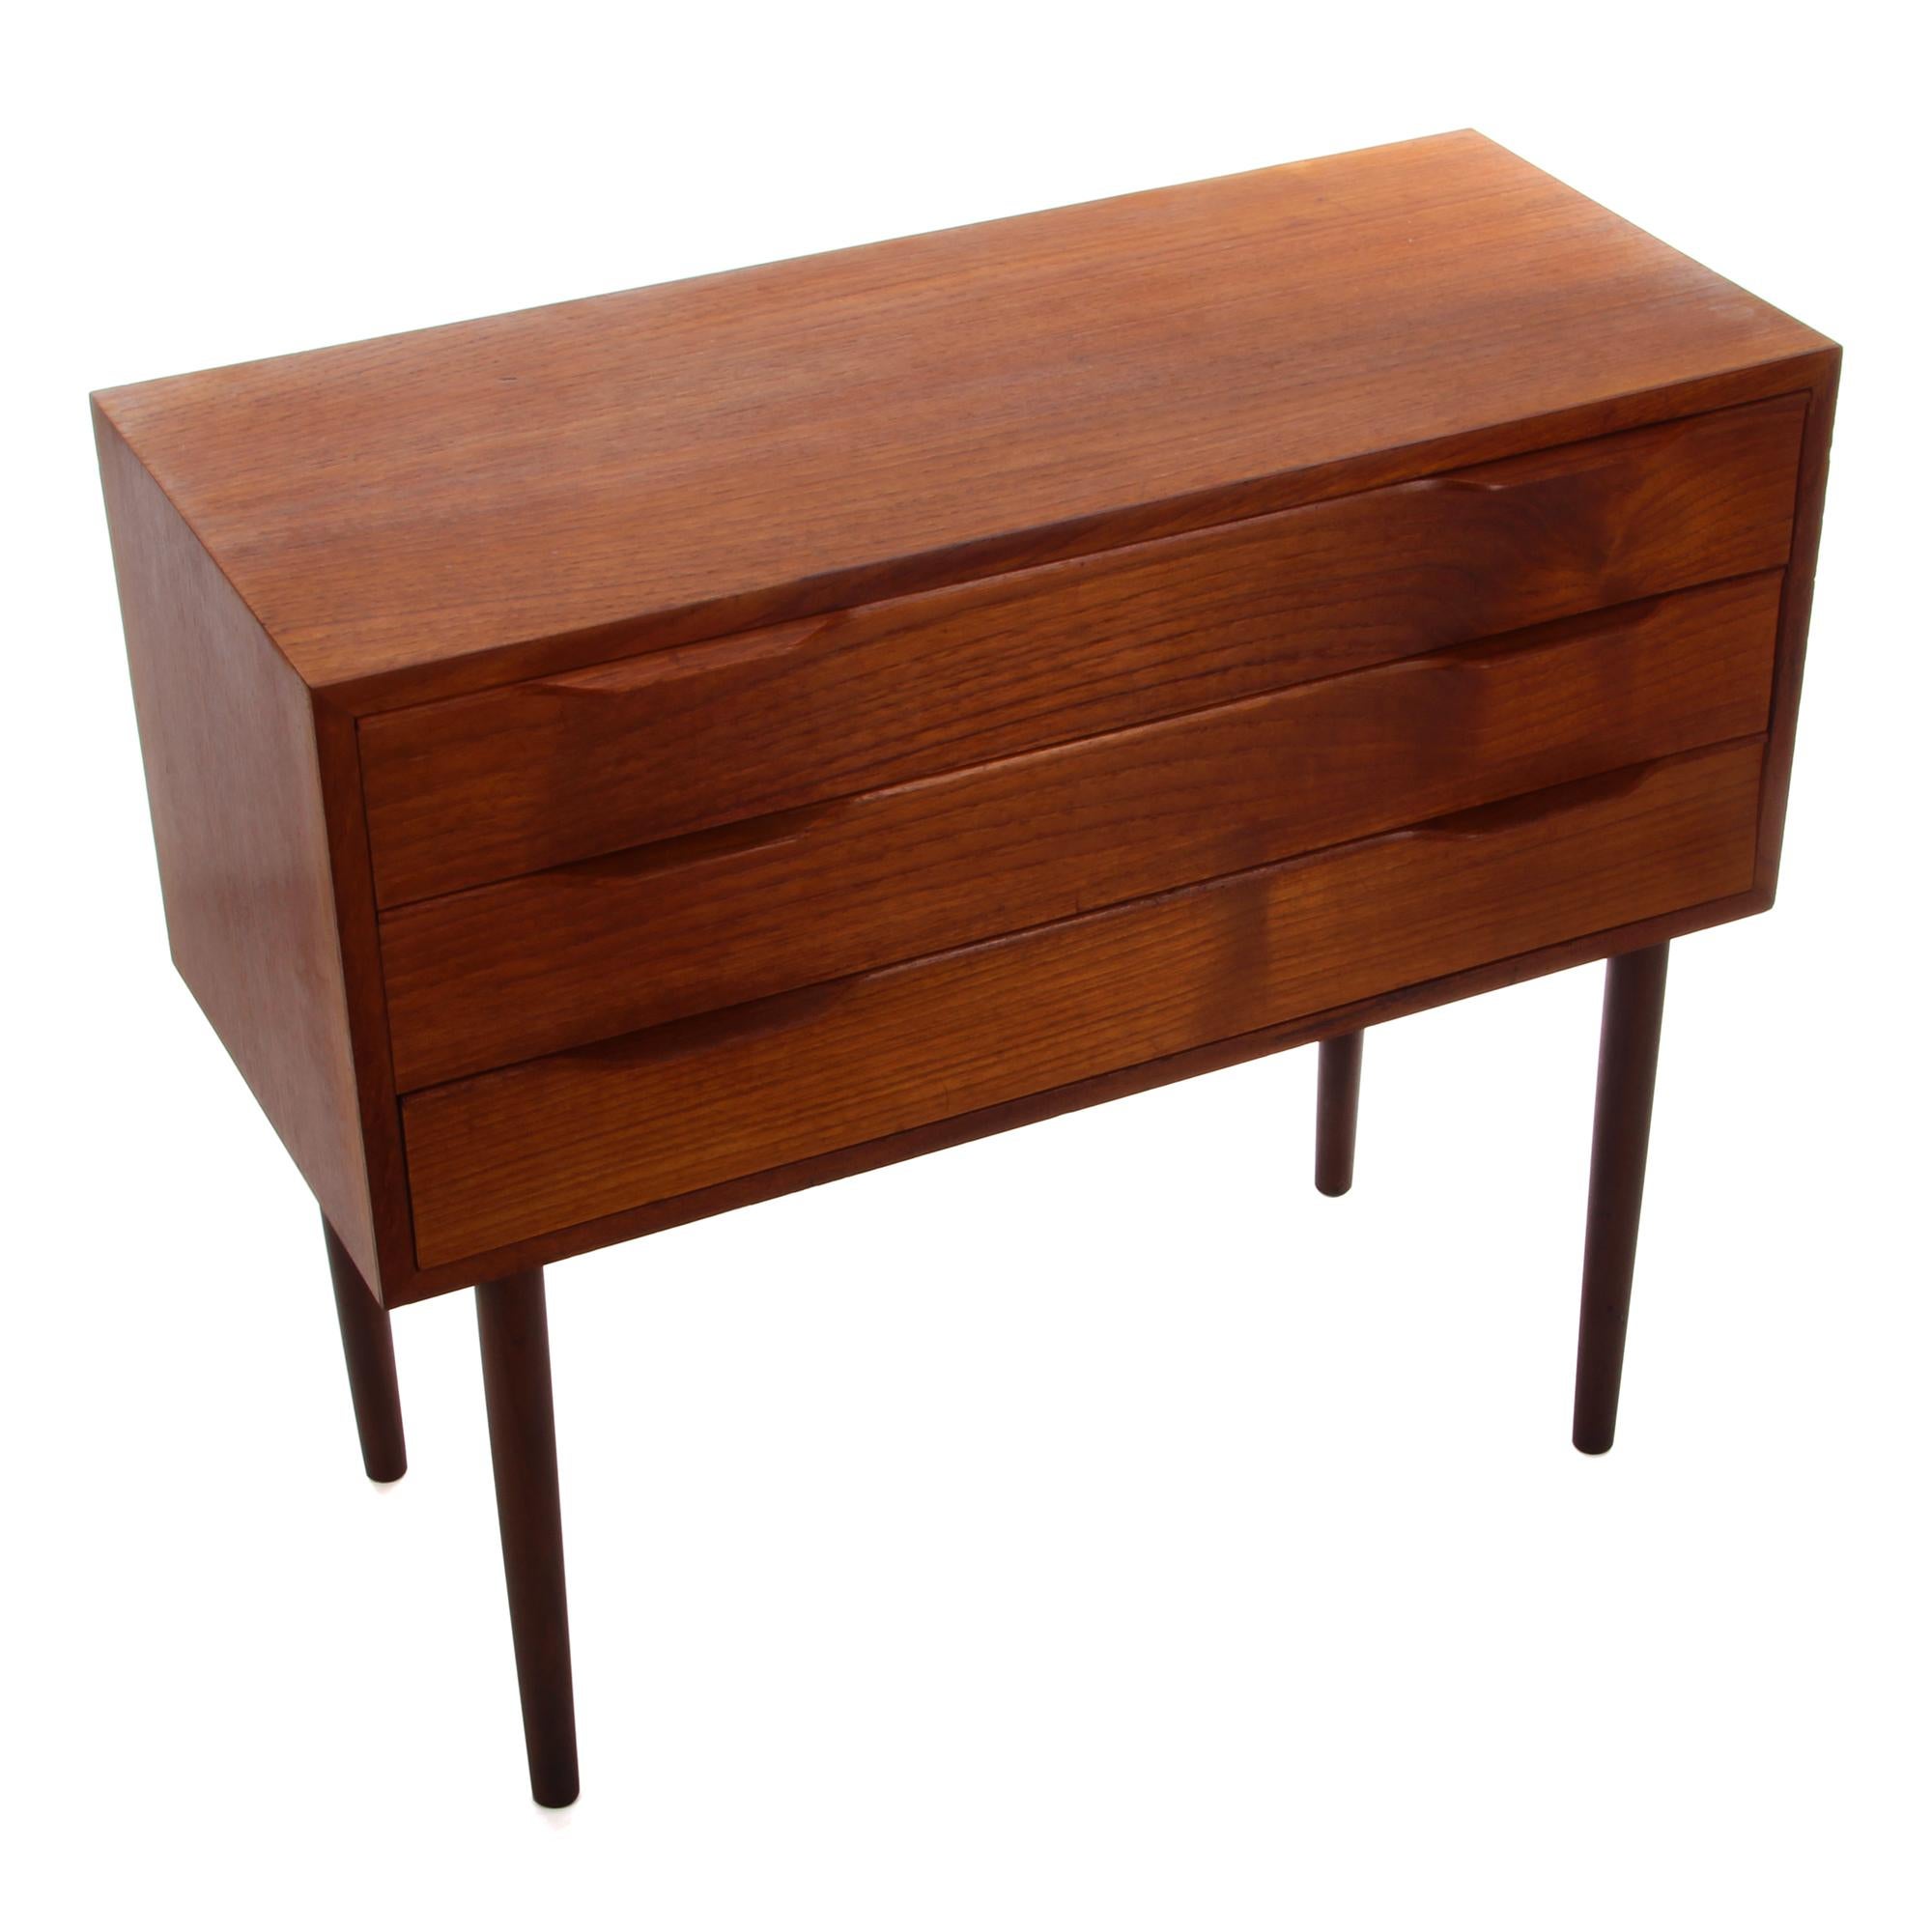 Mid-Century Modern Teak Chest of Drawers from the 1960s, Danish Midcentury Dresser with Drawers